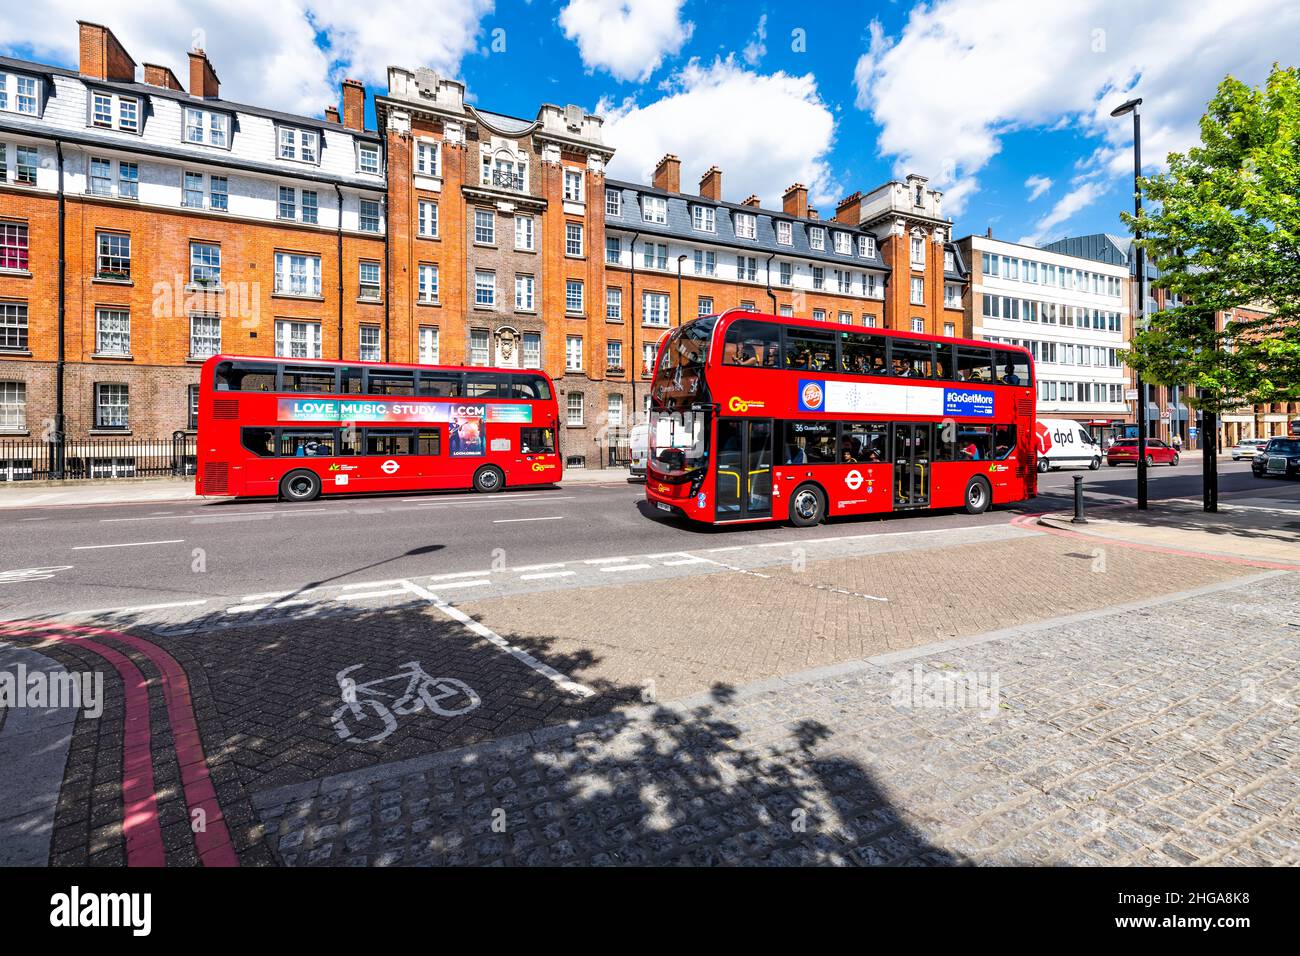 London, UK - June 21, 2018: Two red double decker buses on street in center of downtown city with advertisement sign for love music study and Pizza Go Stock Photo